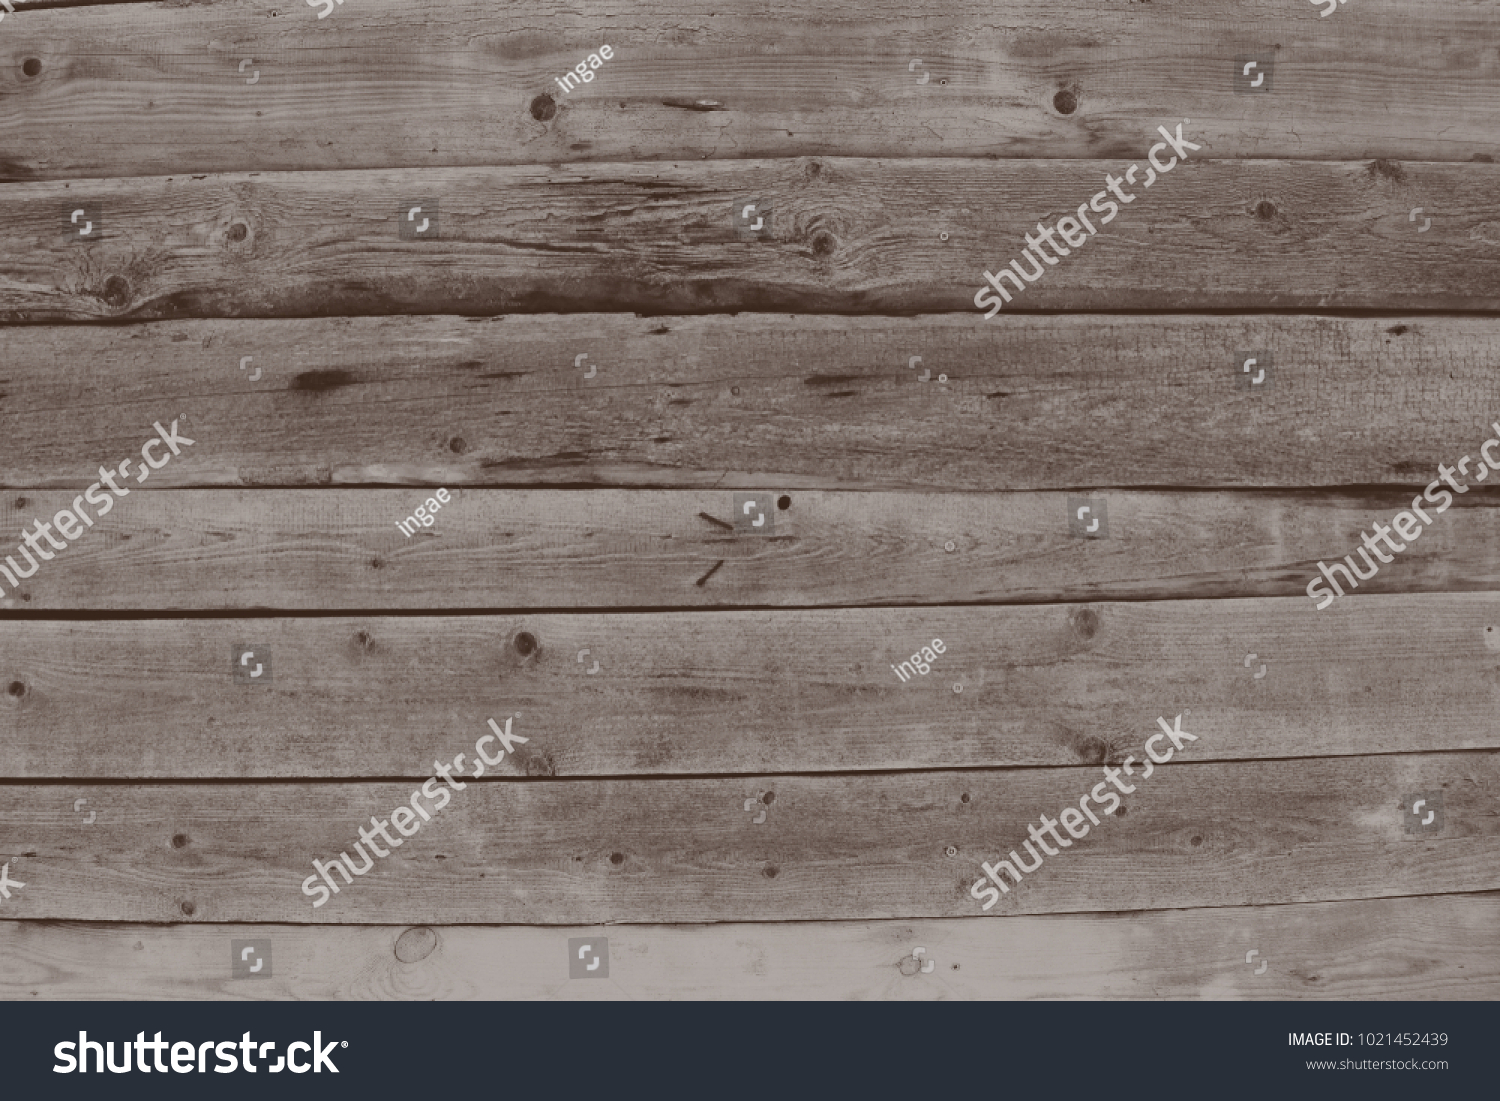 Brown grey wood texture and background. Wood texture background. Rustic, old wooden background. Aged wood planks texture pattern.  #1021452439